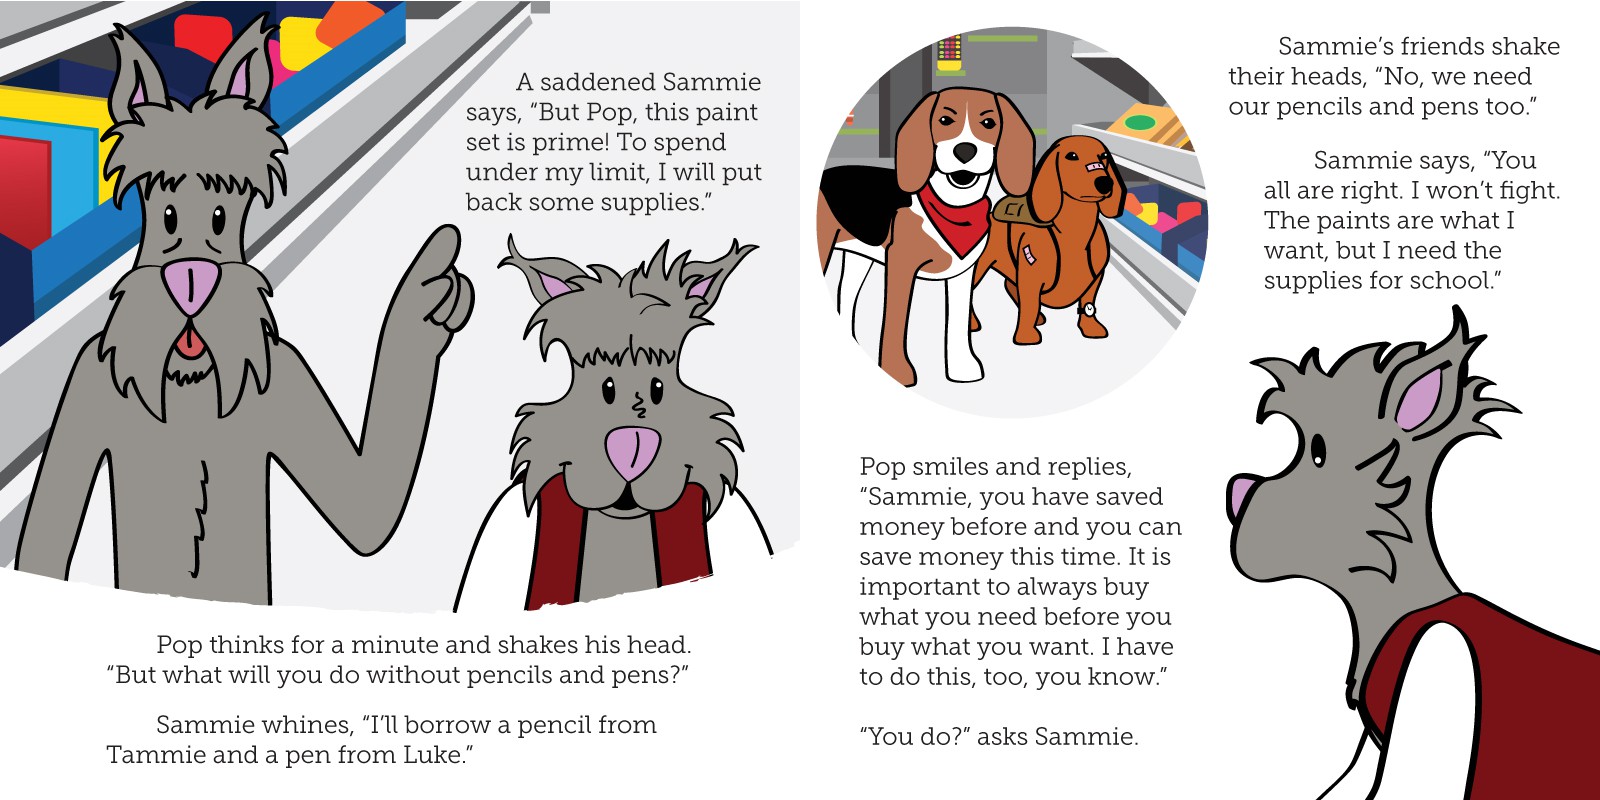 Slide 8 of the Sammie Makes Decisions Book